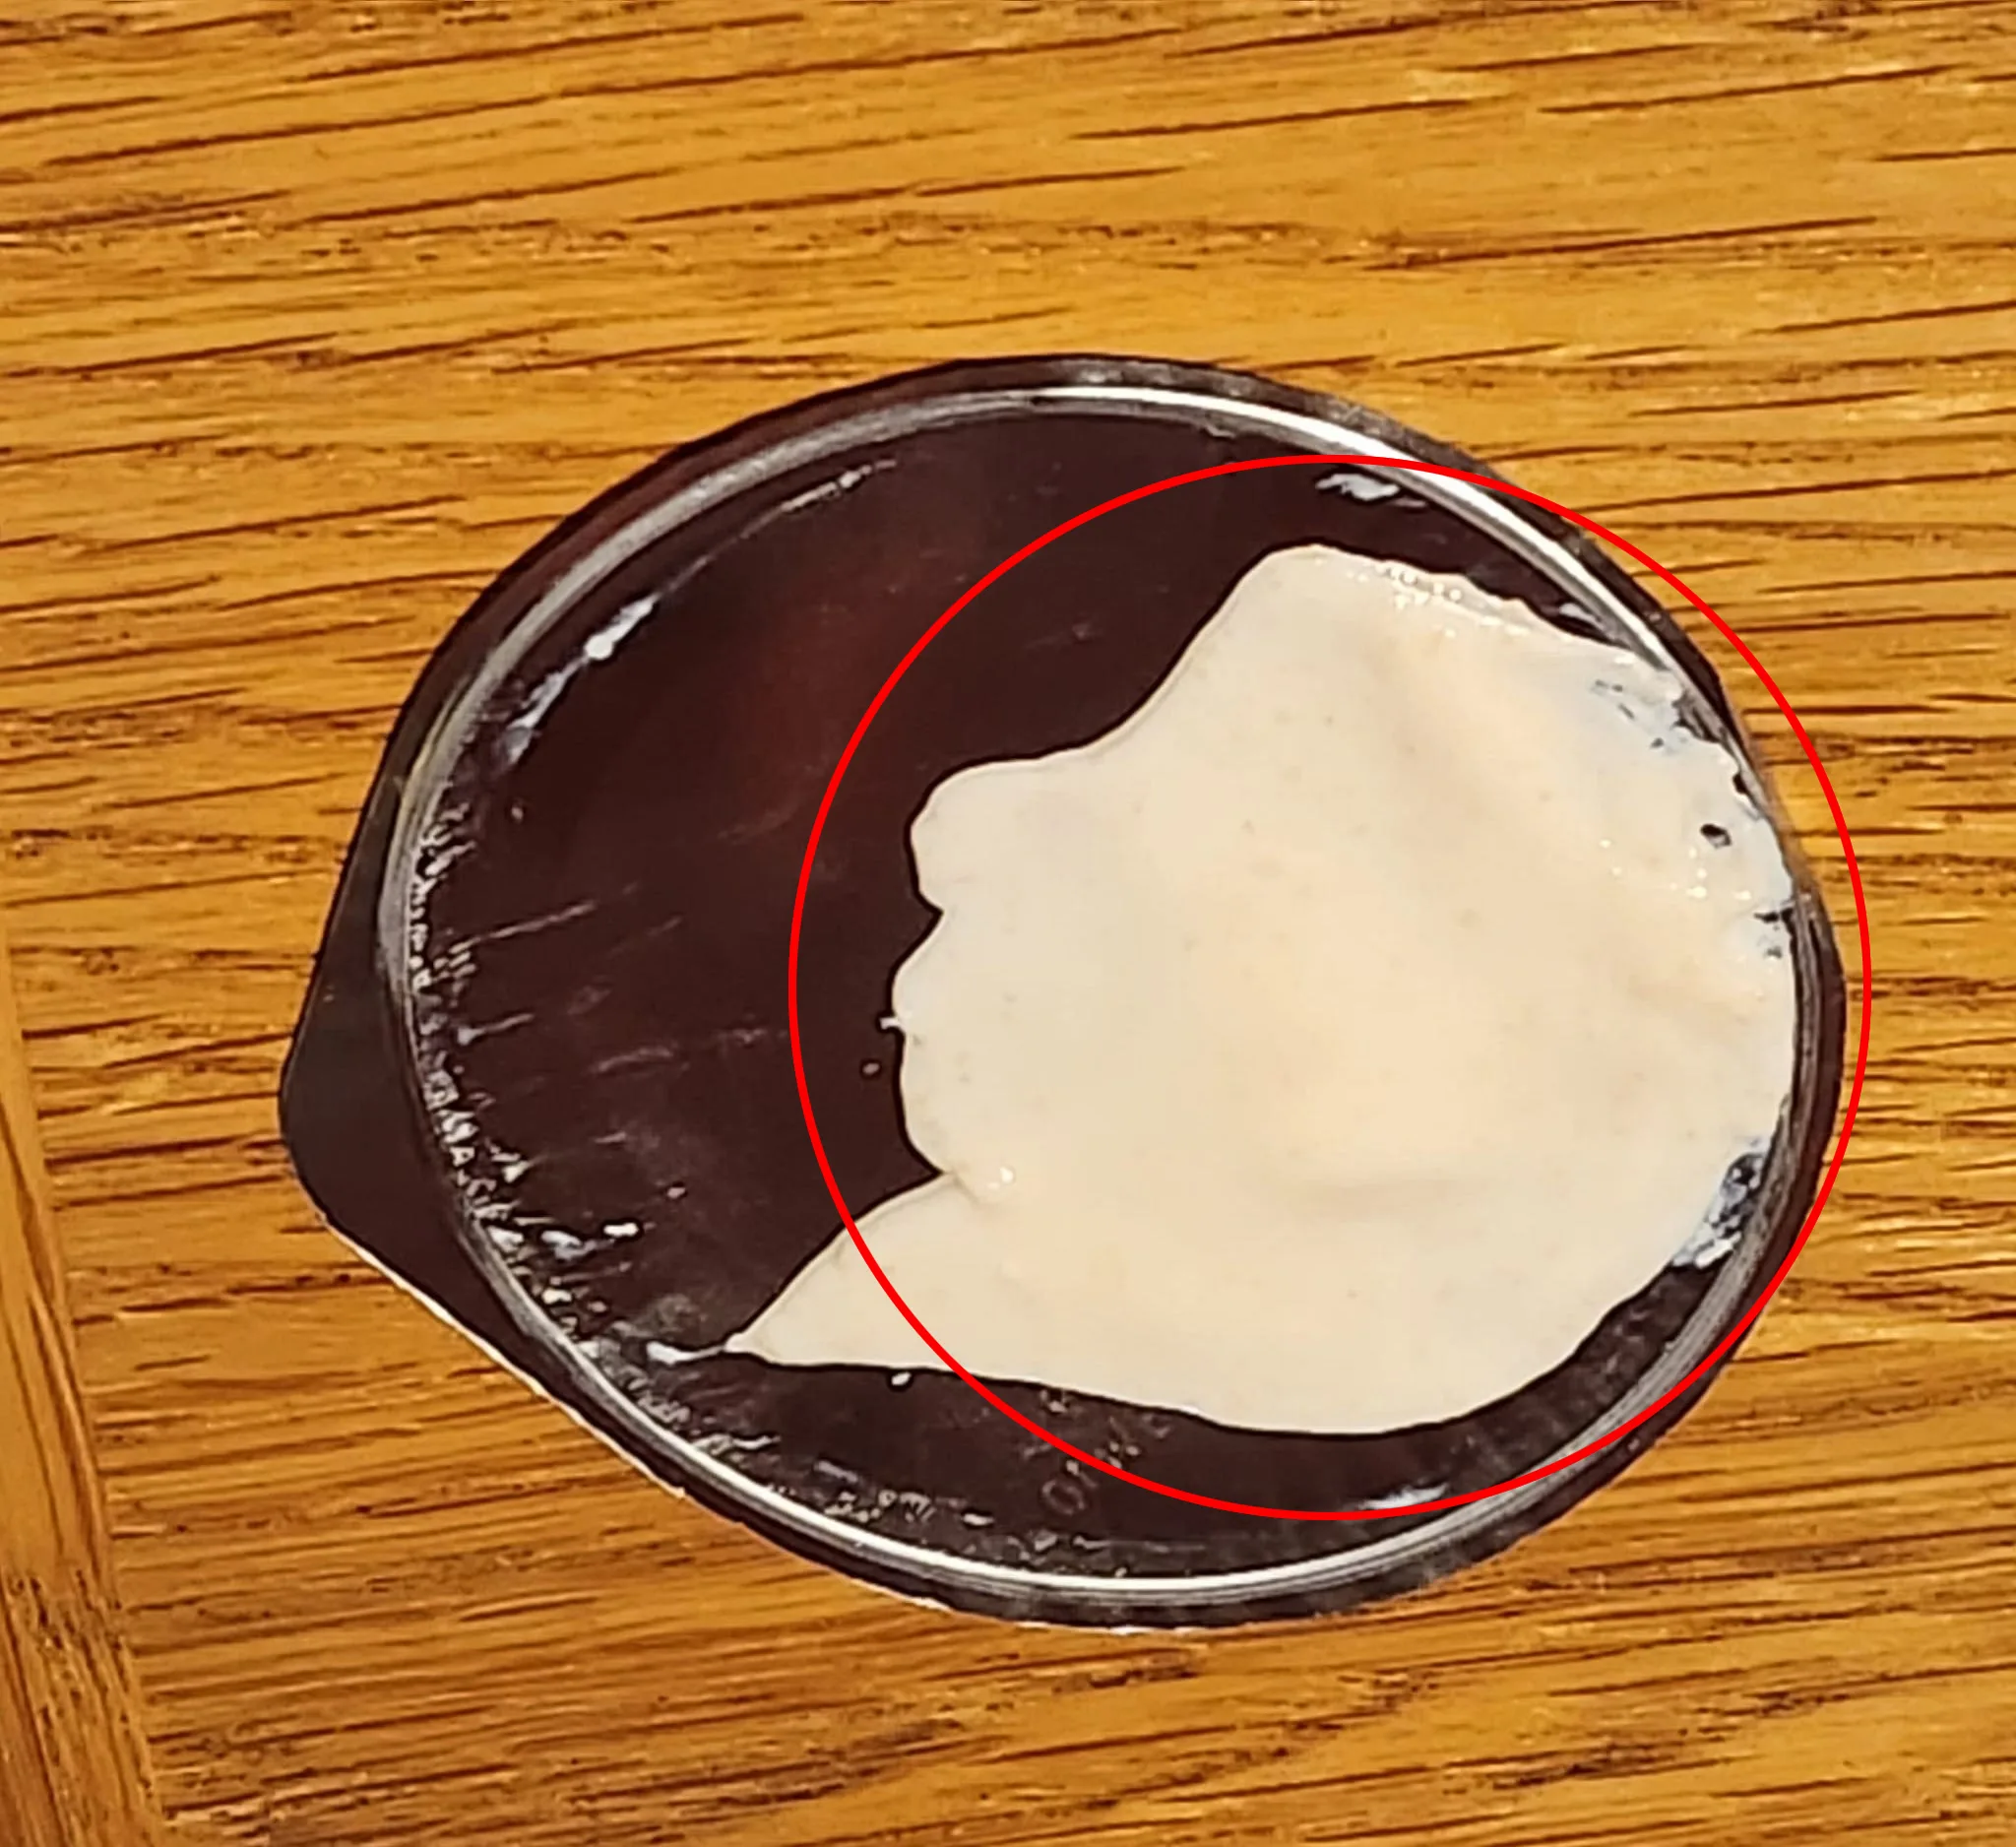 The yoghurt pot lid featuring the pattern that bears an uncanny resemblance to Alfred Hitchcock, leaves social media users shocked.